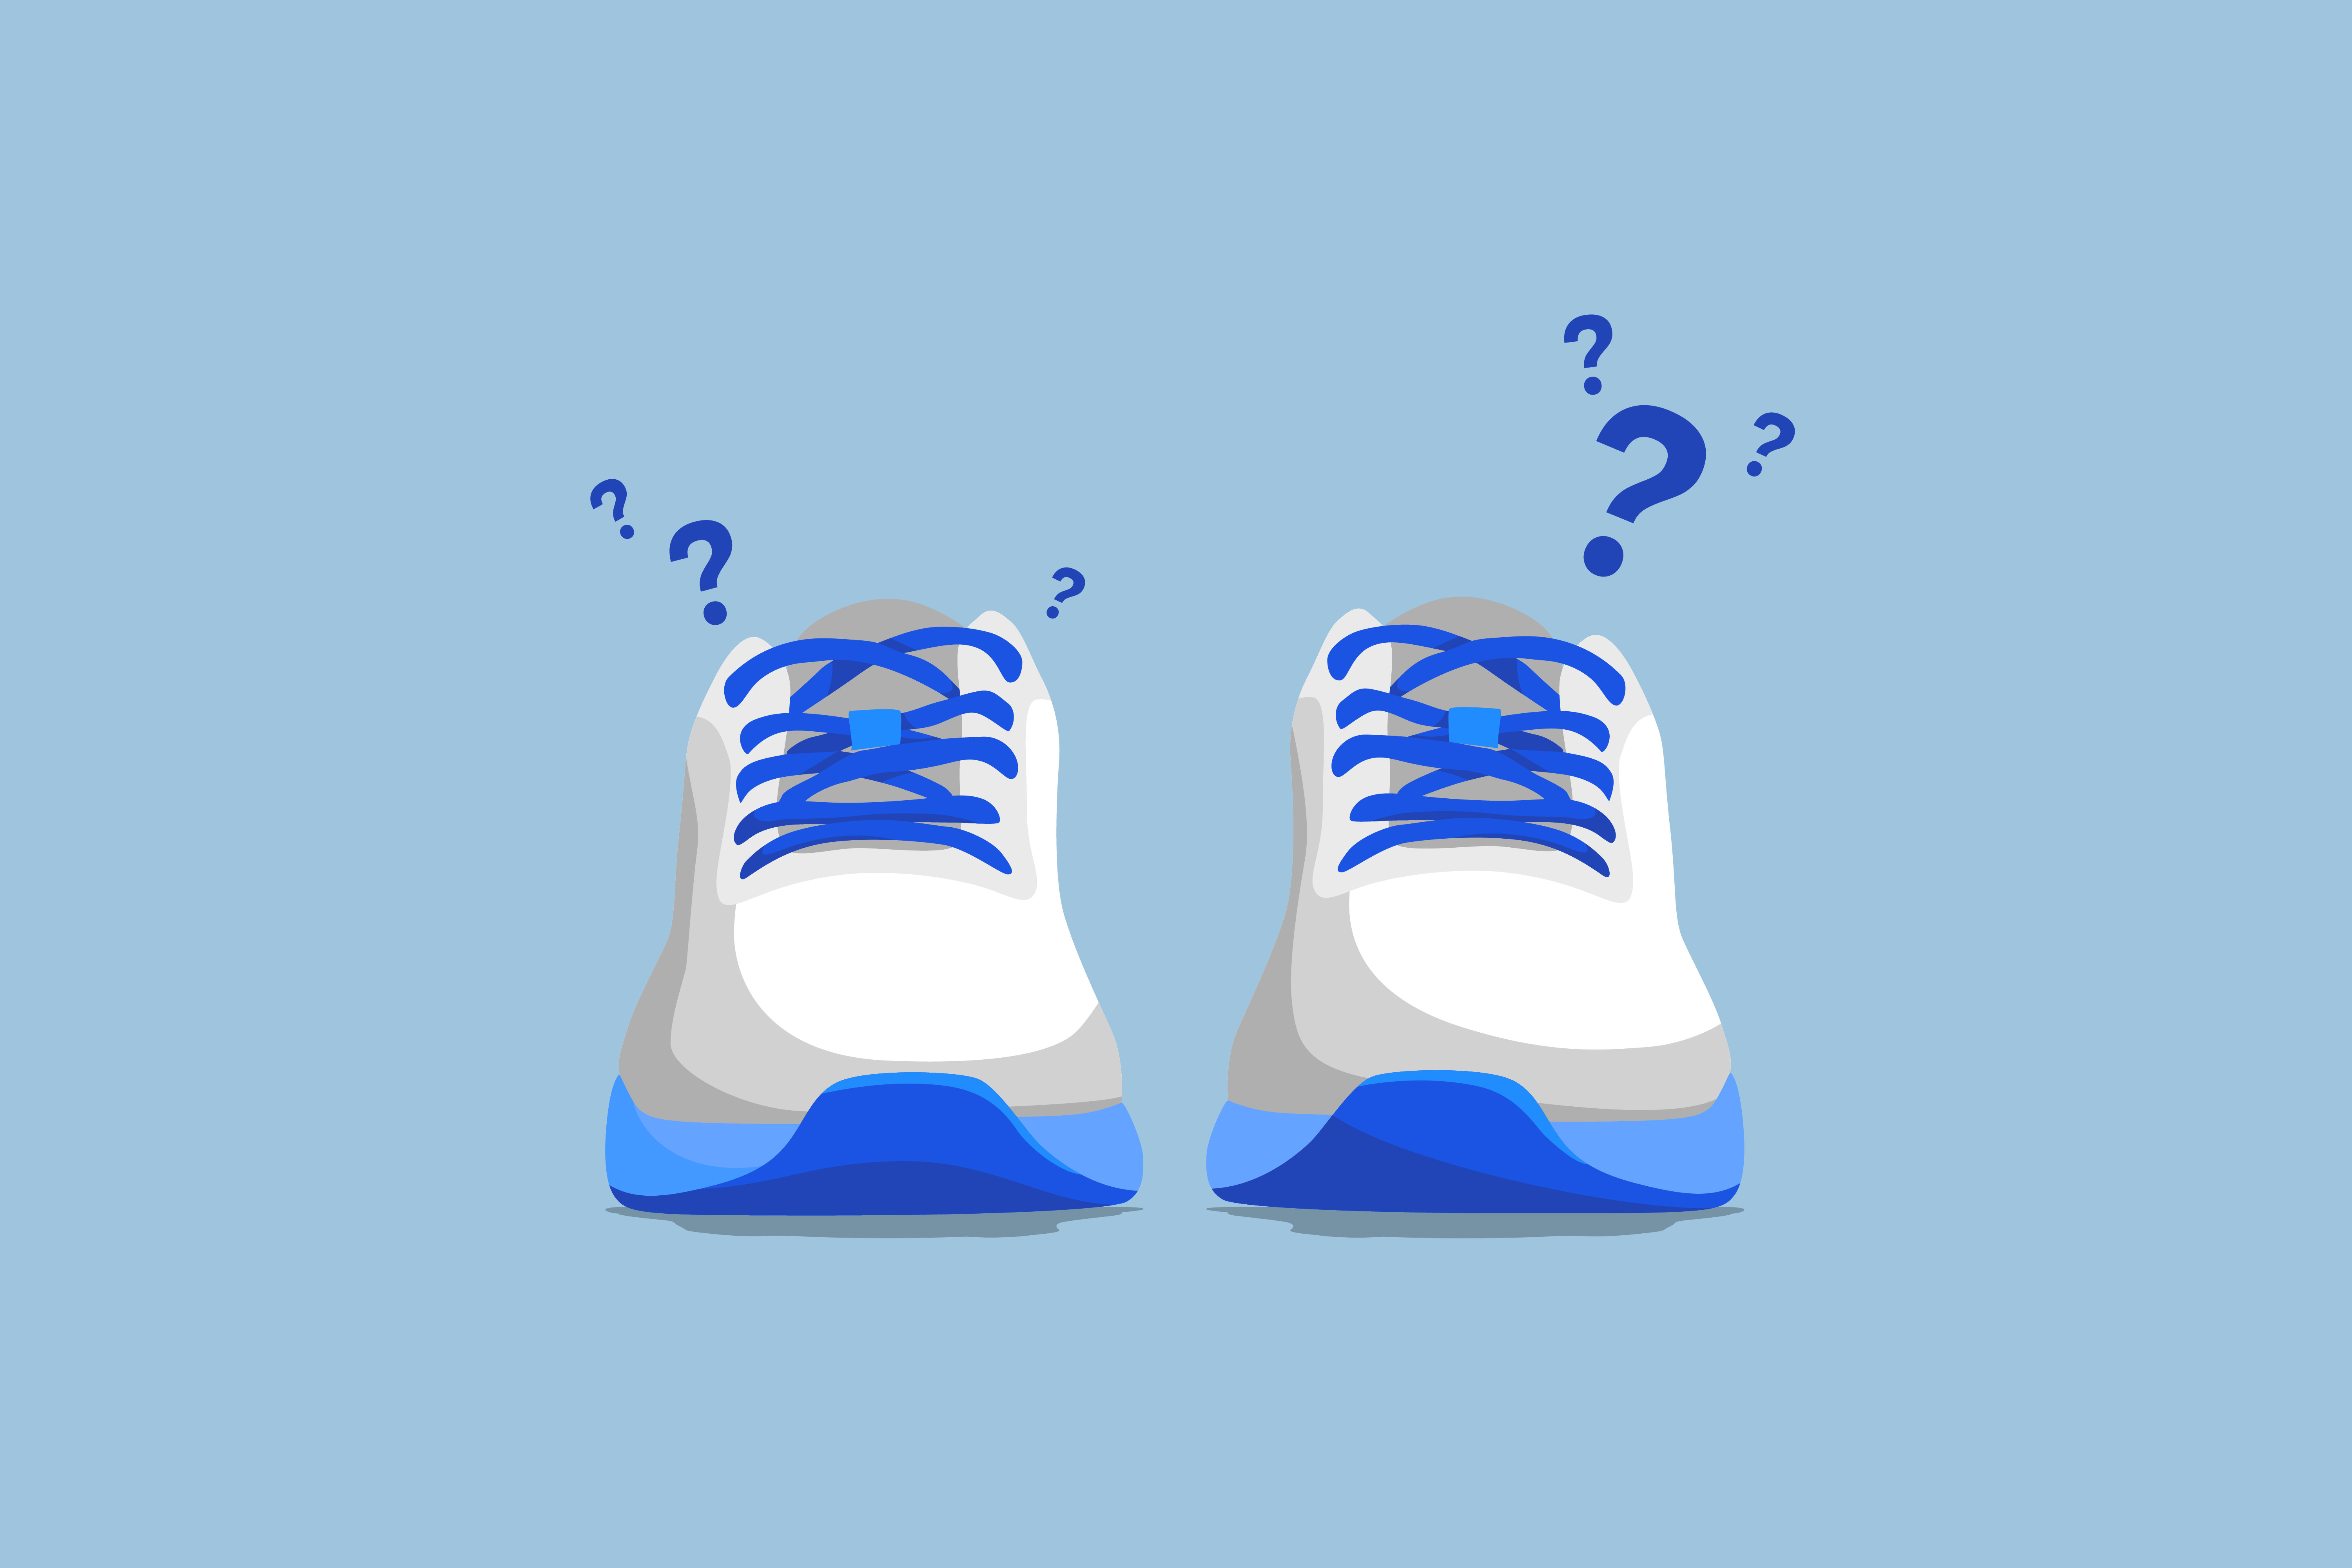 Should I Stop Leaving Shoes in the Bedroom?